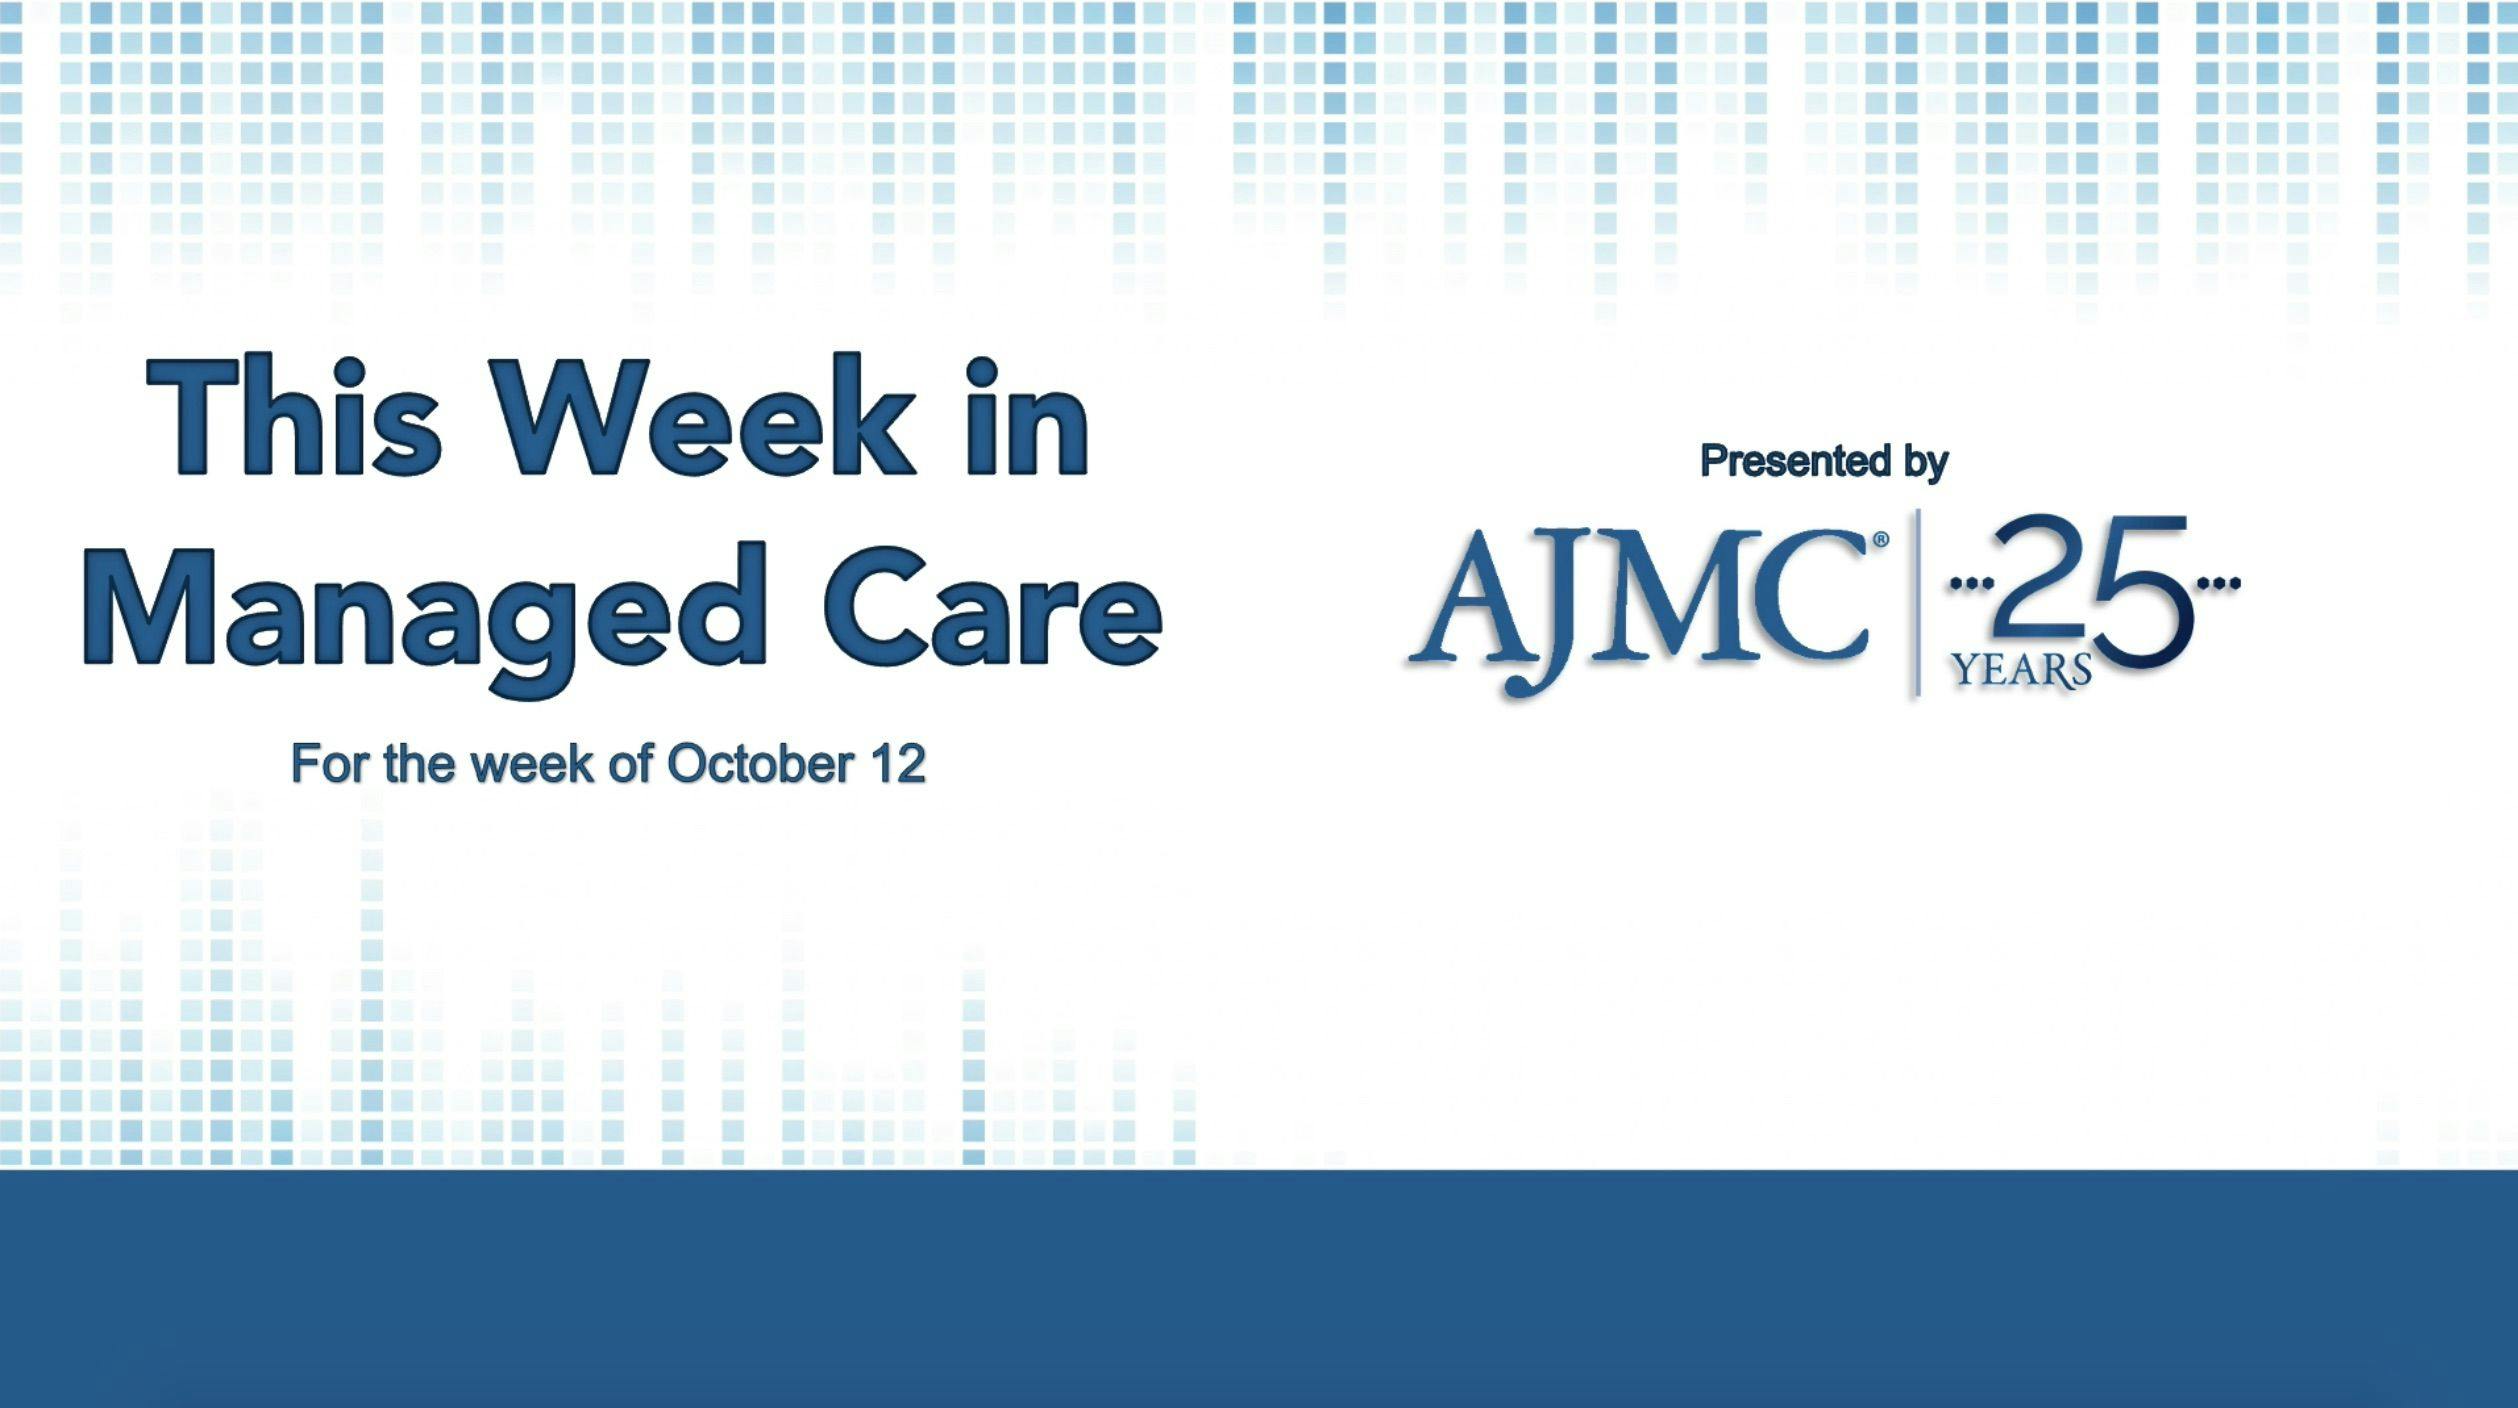 This Week in Managed Care: October 16, 2020